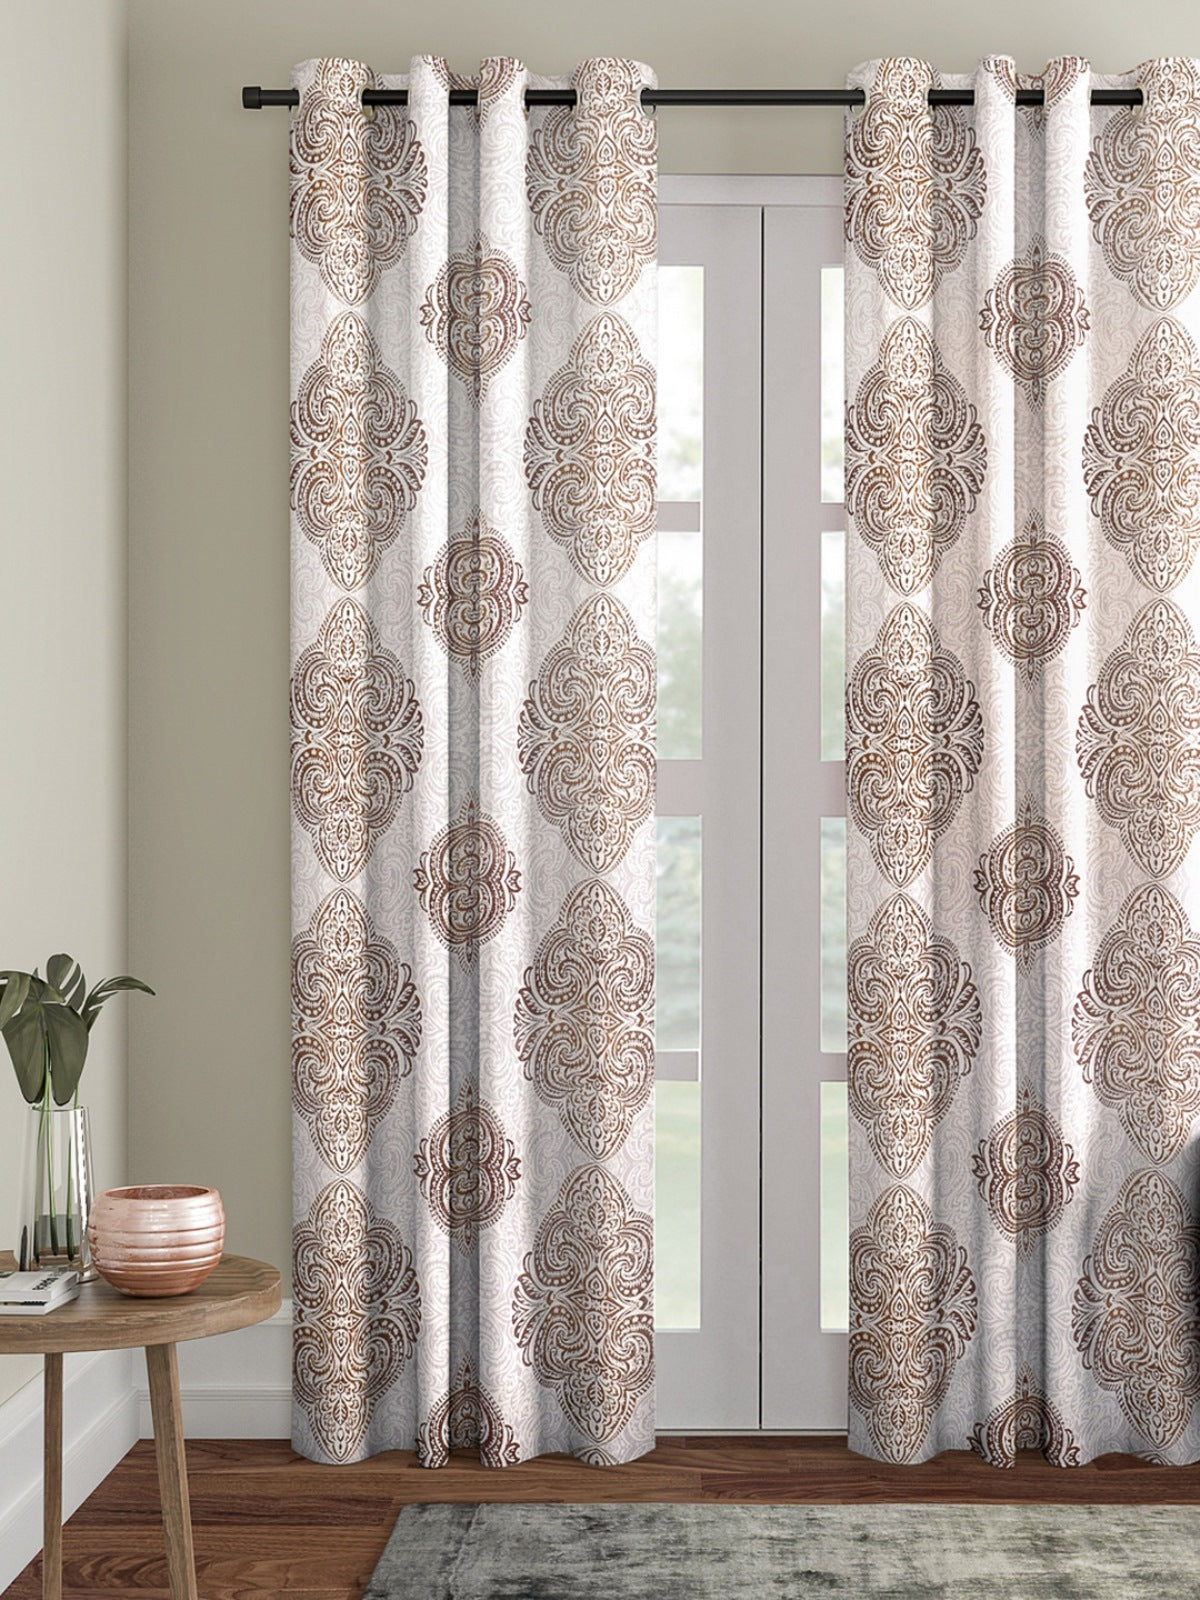 Romee Off White & Silver Ethnic Motifs Patterned Set of 1 Door Curtains